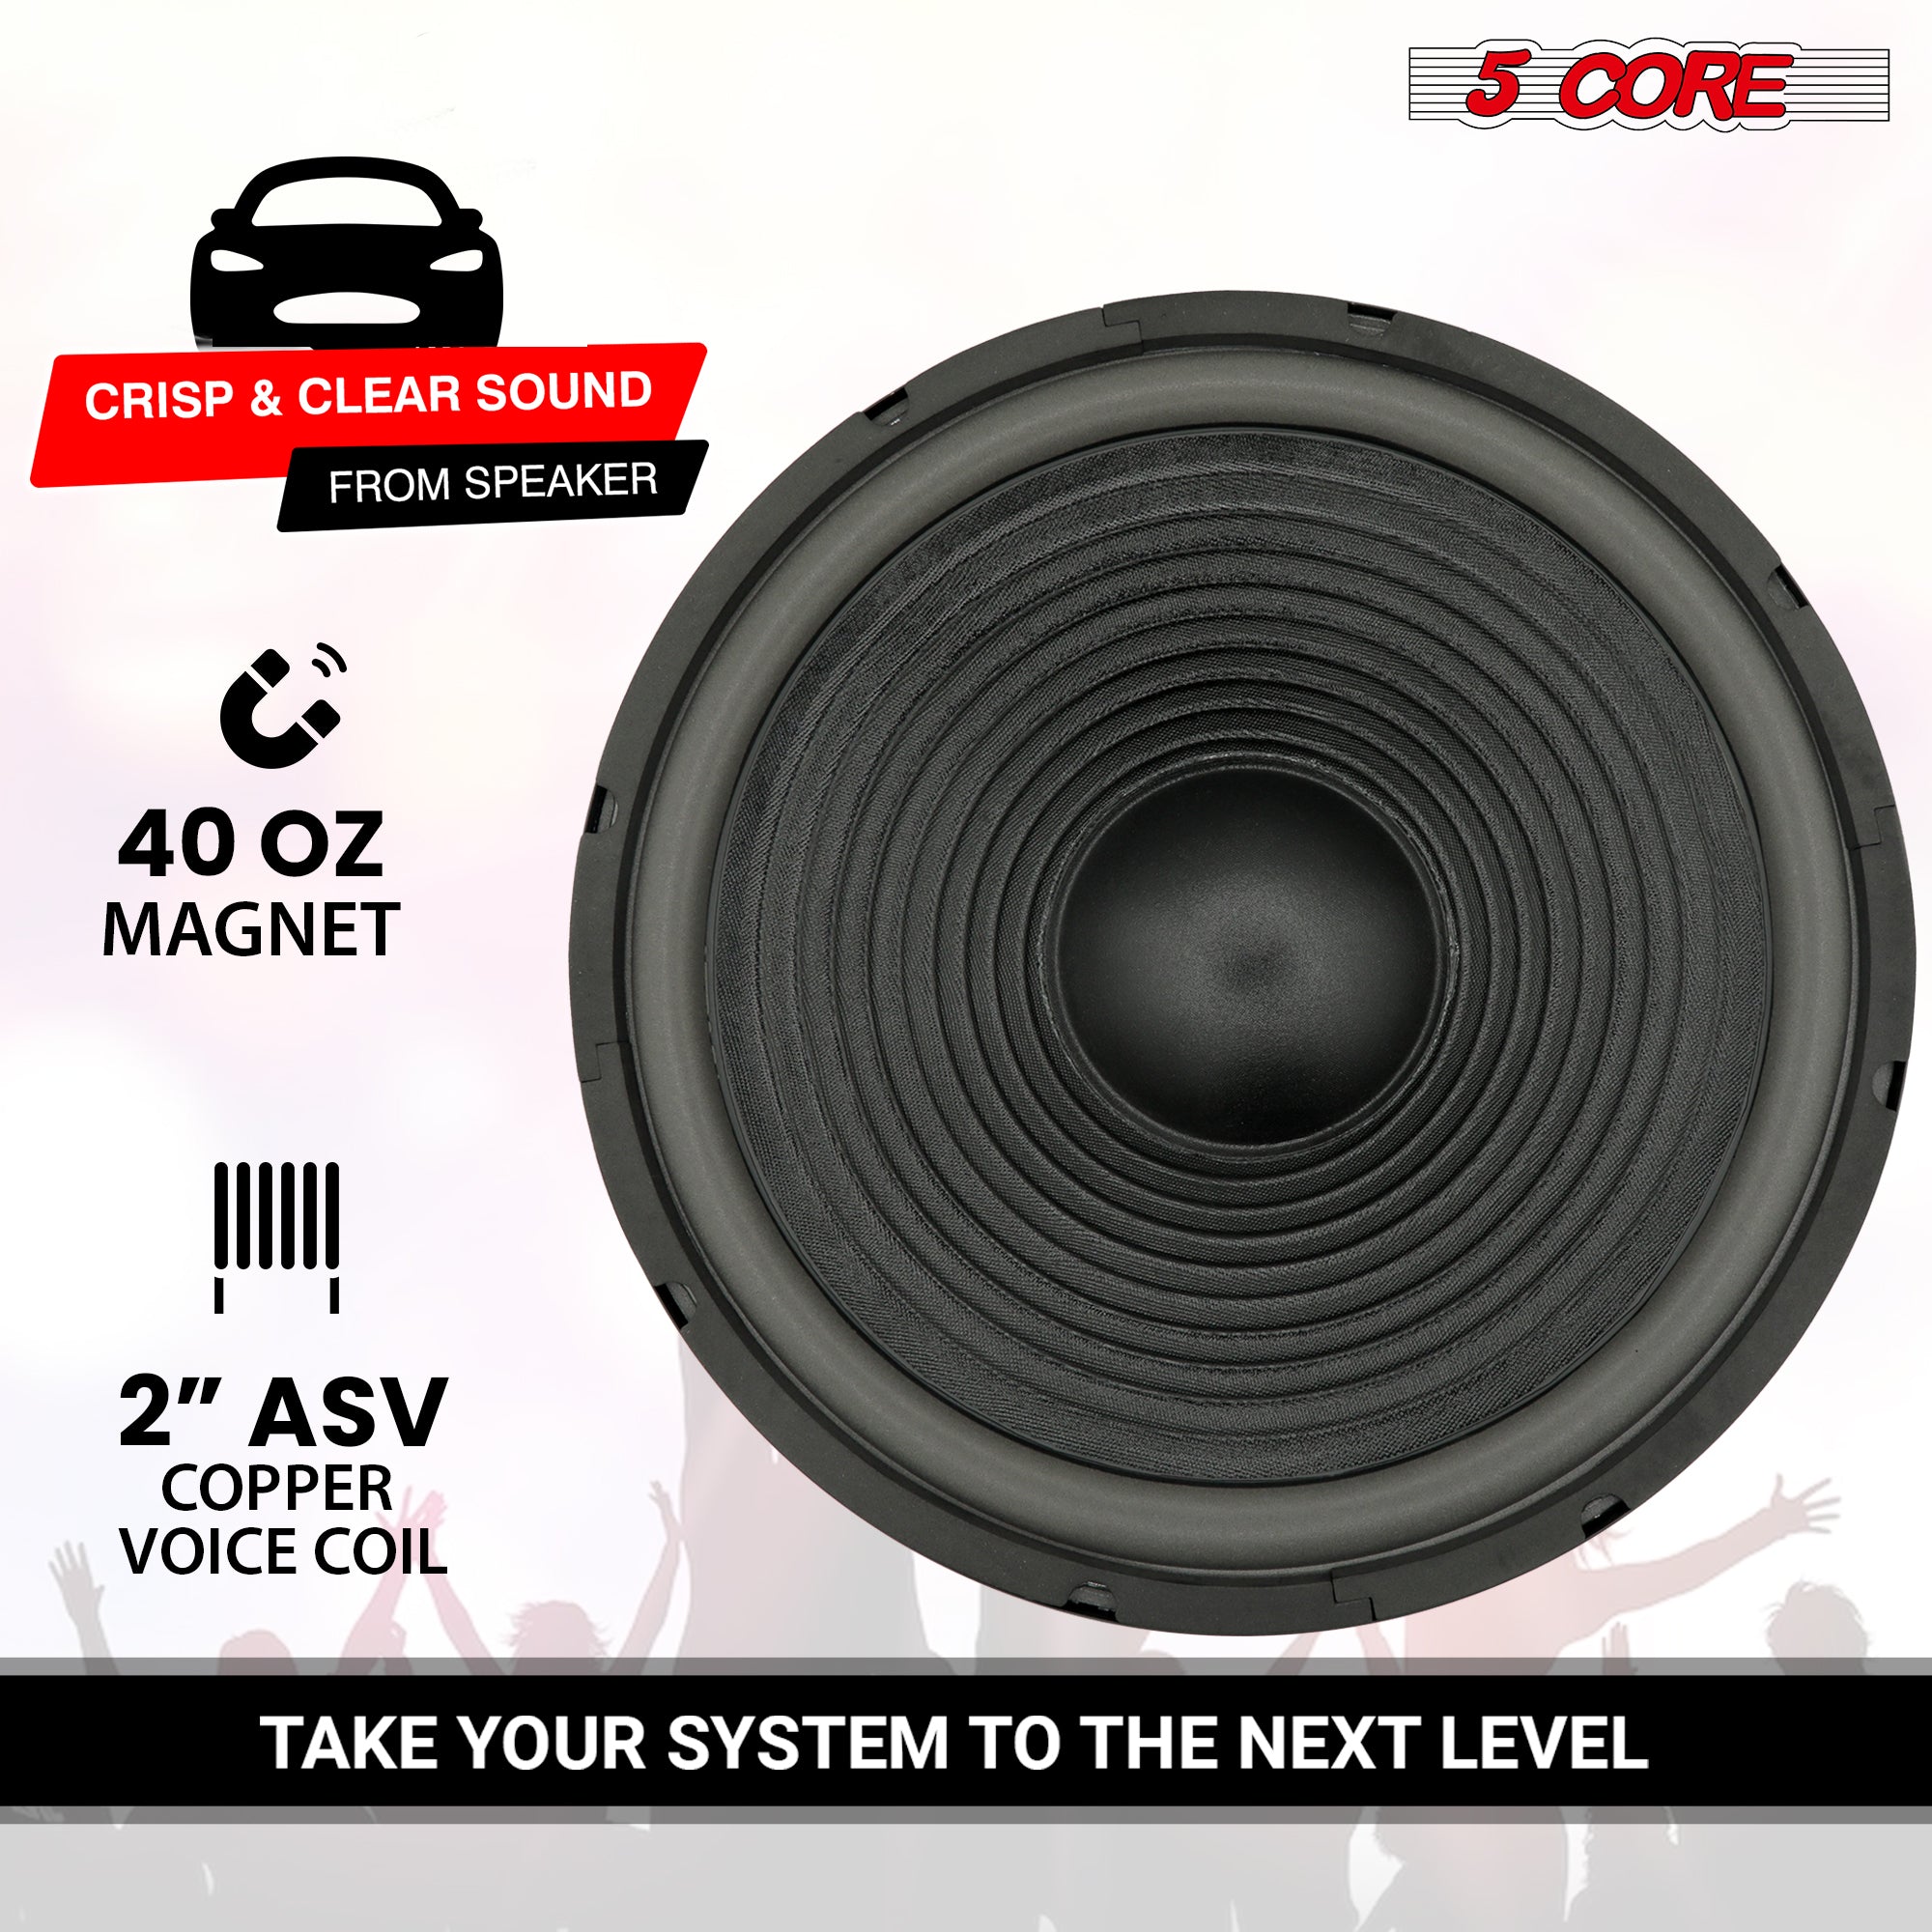 5Core 15 Inch Subwoofer Speaker 450W Max 4 Ohm Replacement Car Bass Sub Woofer 40 Oz Magnet 1/ 2 Pc